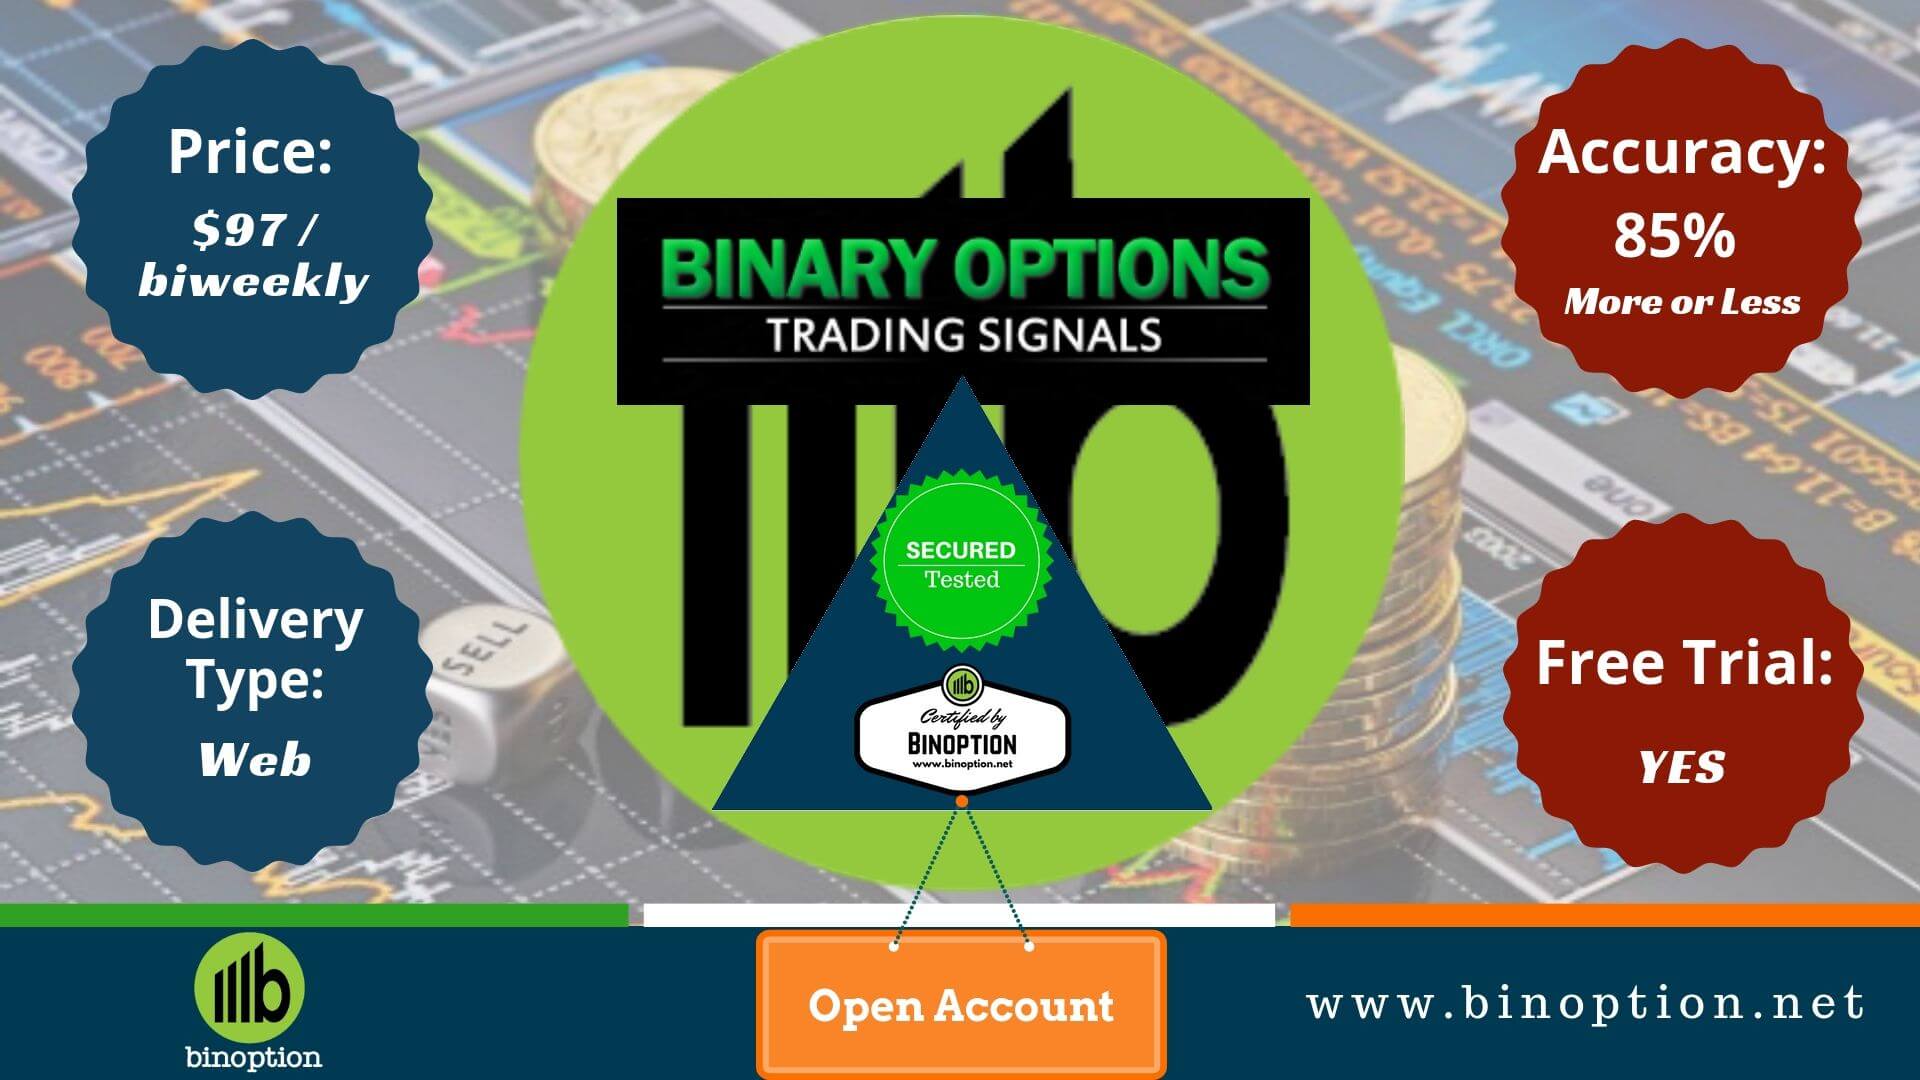 Franco binary options trading signals review